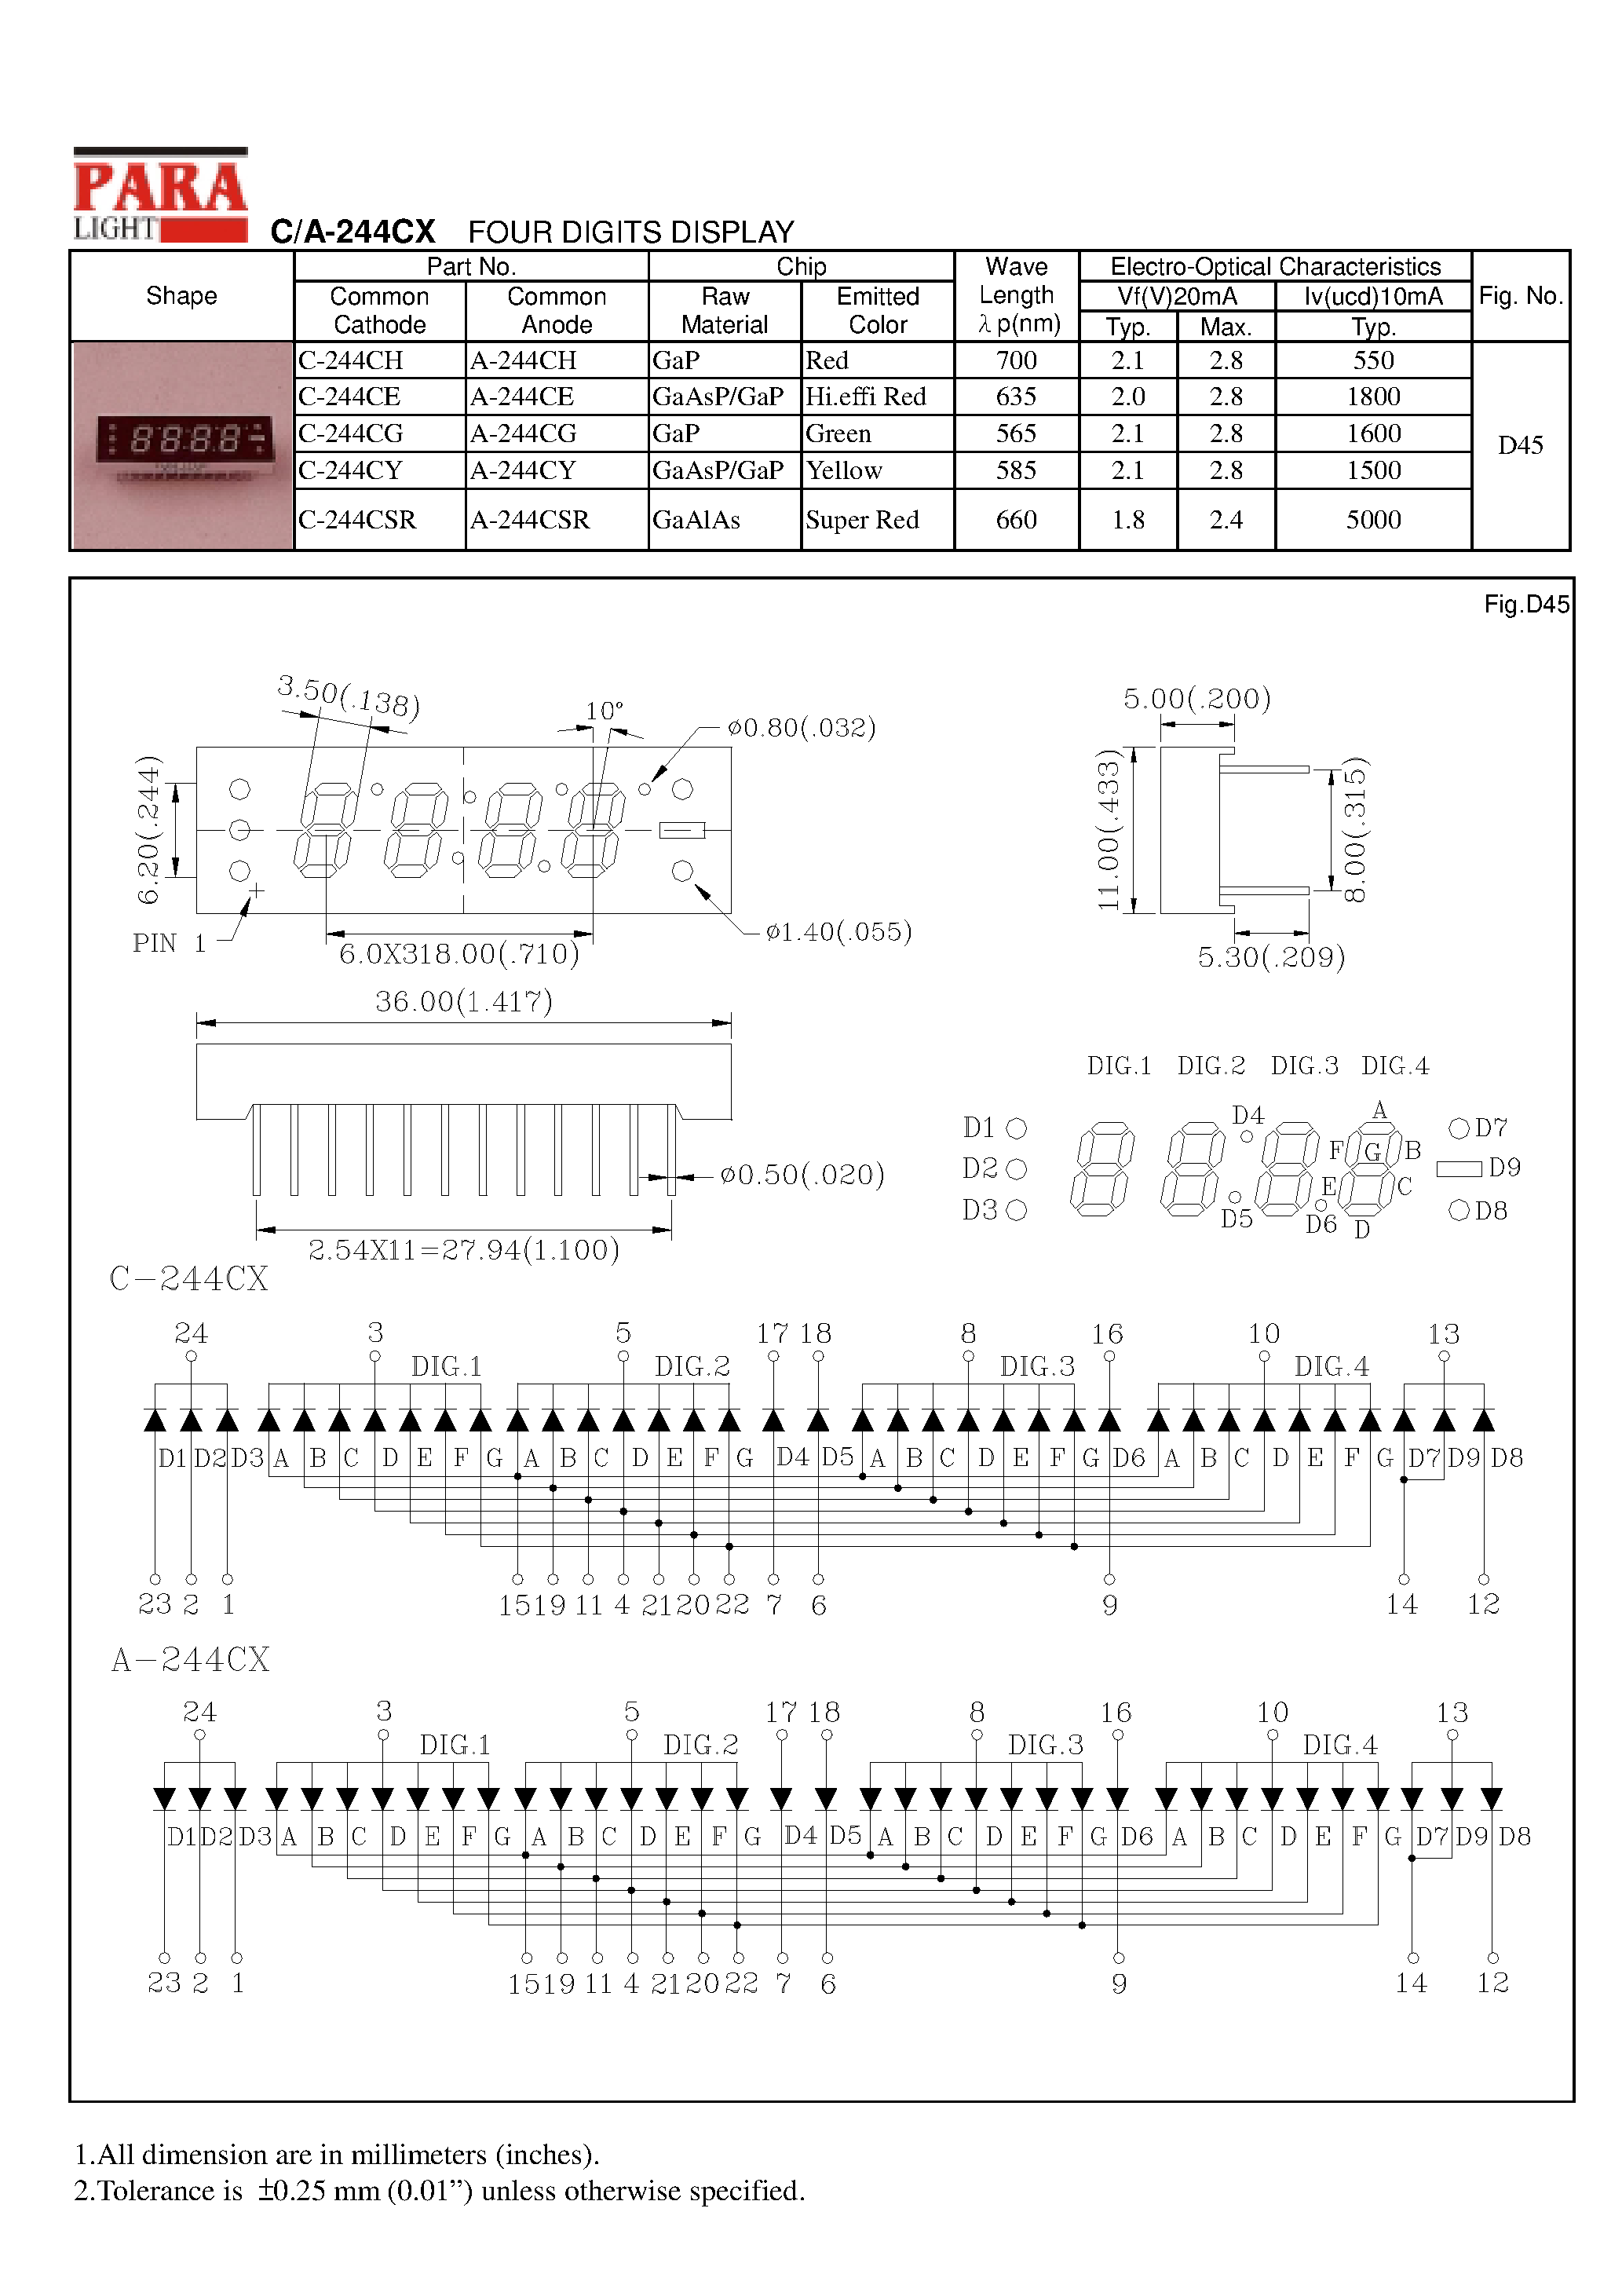 Datasheet A-244CX - FOUR DIGITS DISPLAY page 1